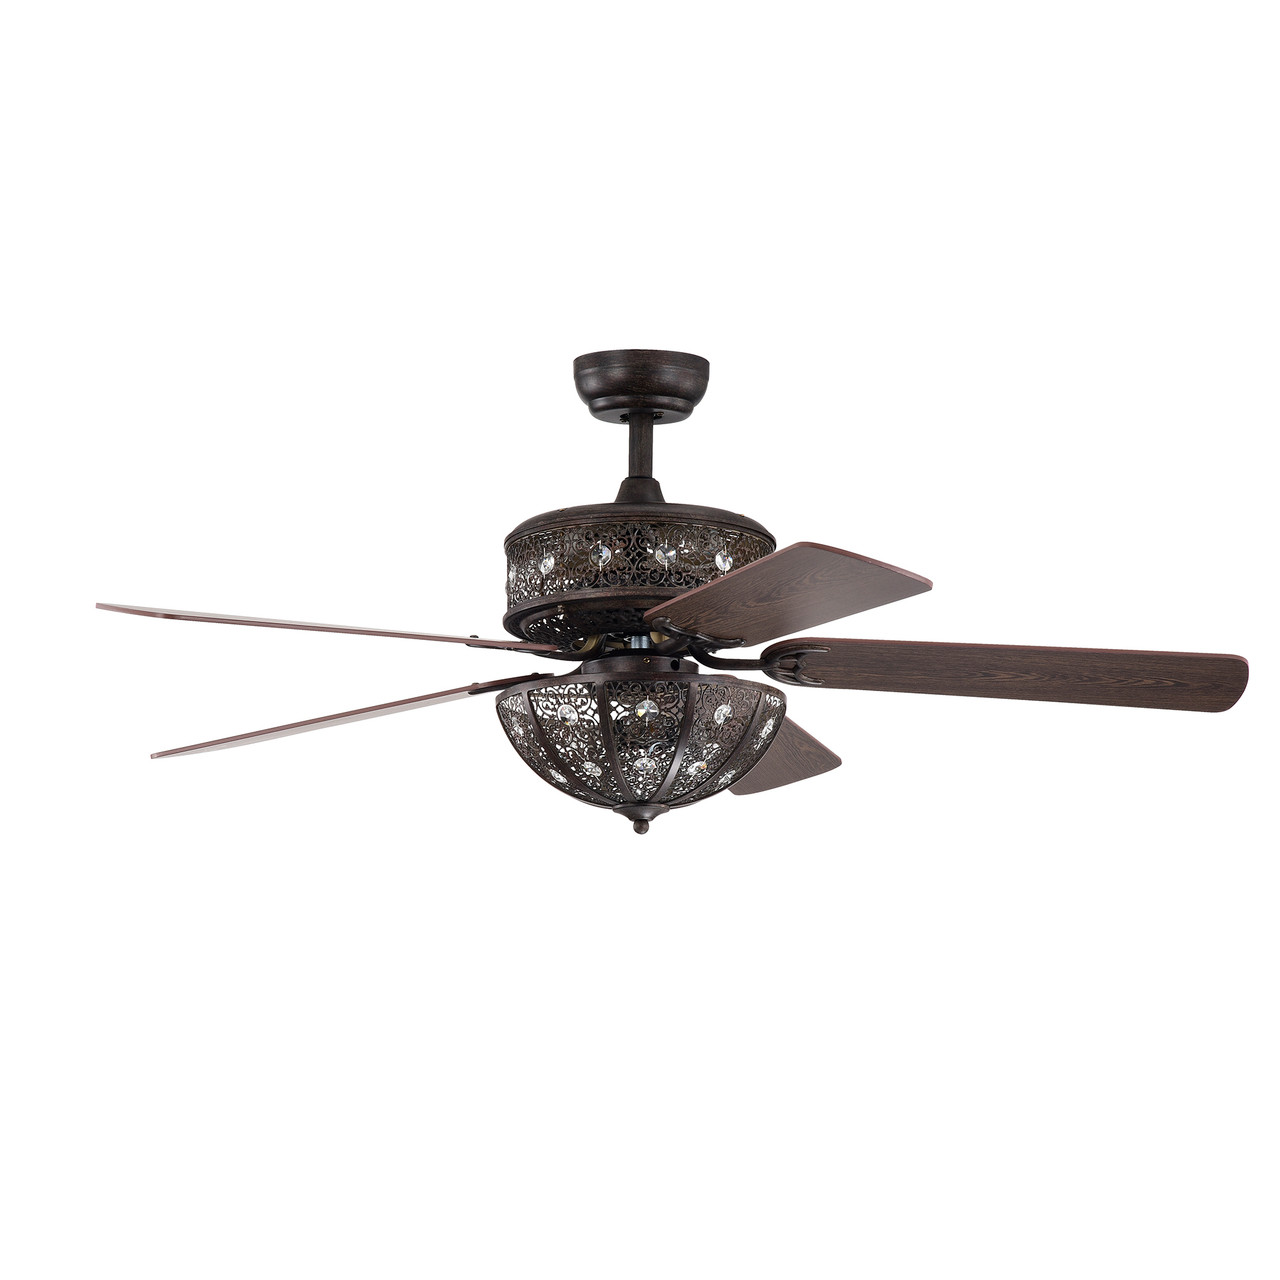 WAREHOUSE OF TIFFANY'S CFL-8448REMO/DR Milly 22 in. 6-Light Indoor Bronze Finish Remote Controlled Ceiling Fan with Light Kit